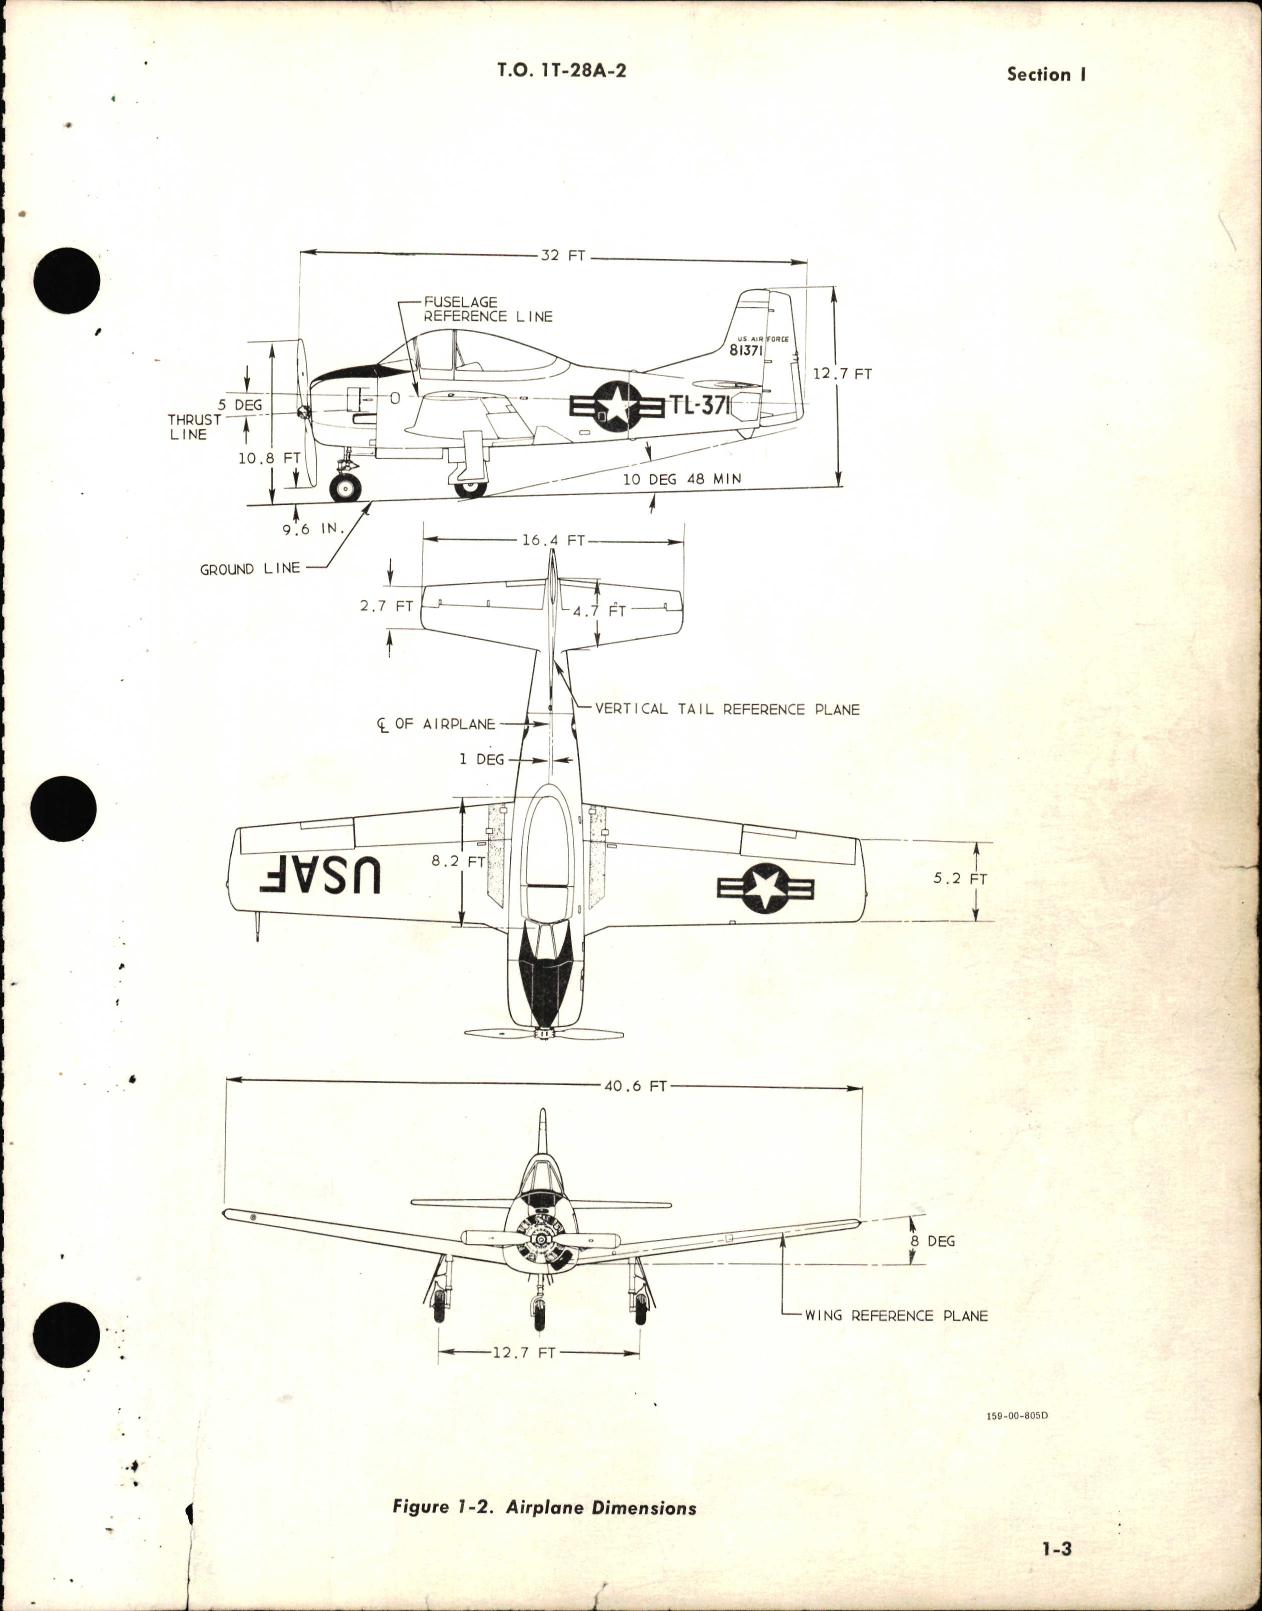 Sample page 5 from AirCorps Library document: Maintenance Manual for T-28A